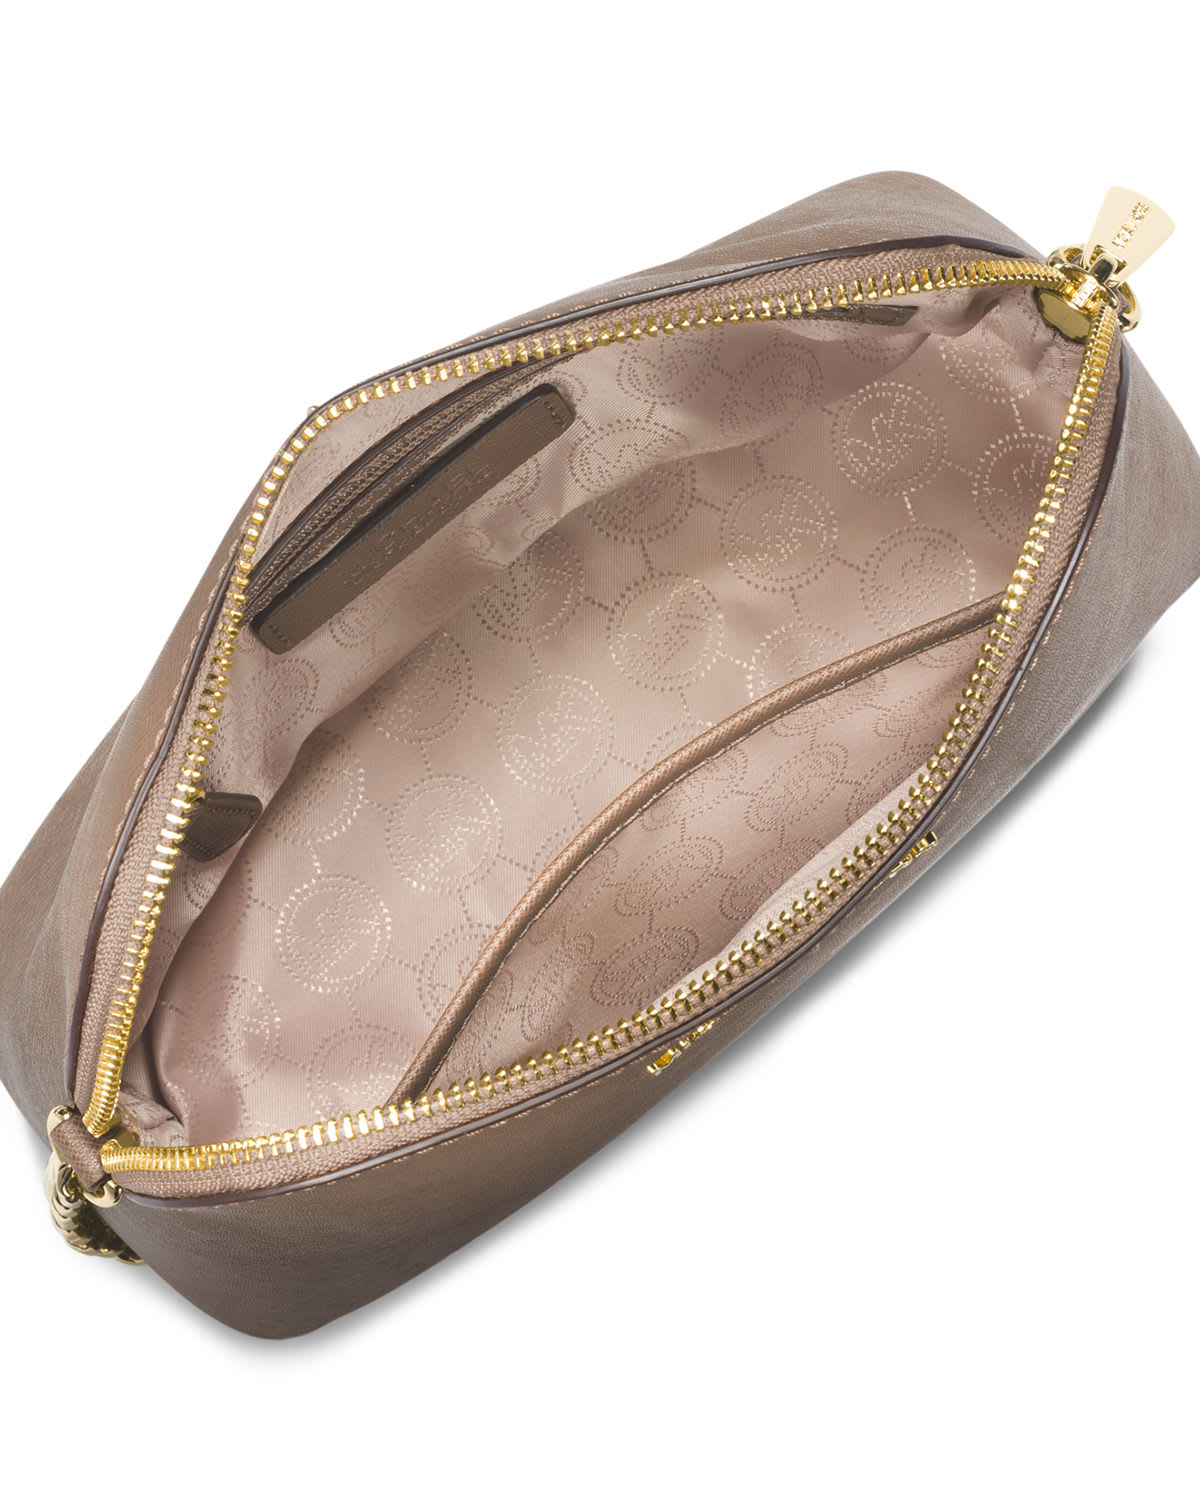 Cindy Large Dome Crossbody Bag, Pale Gold